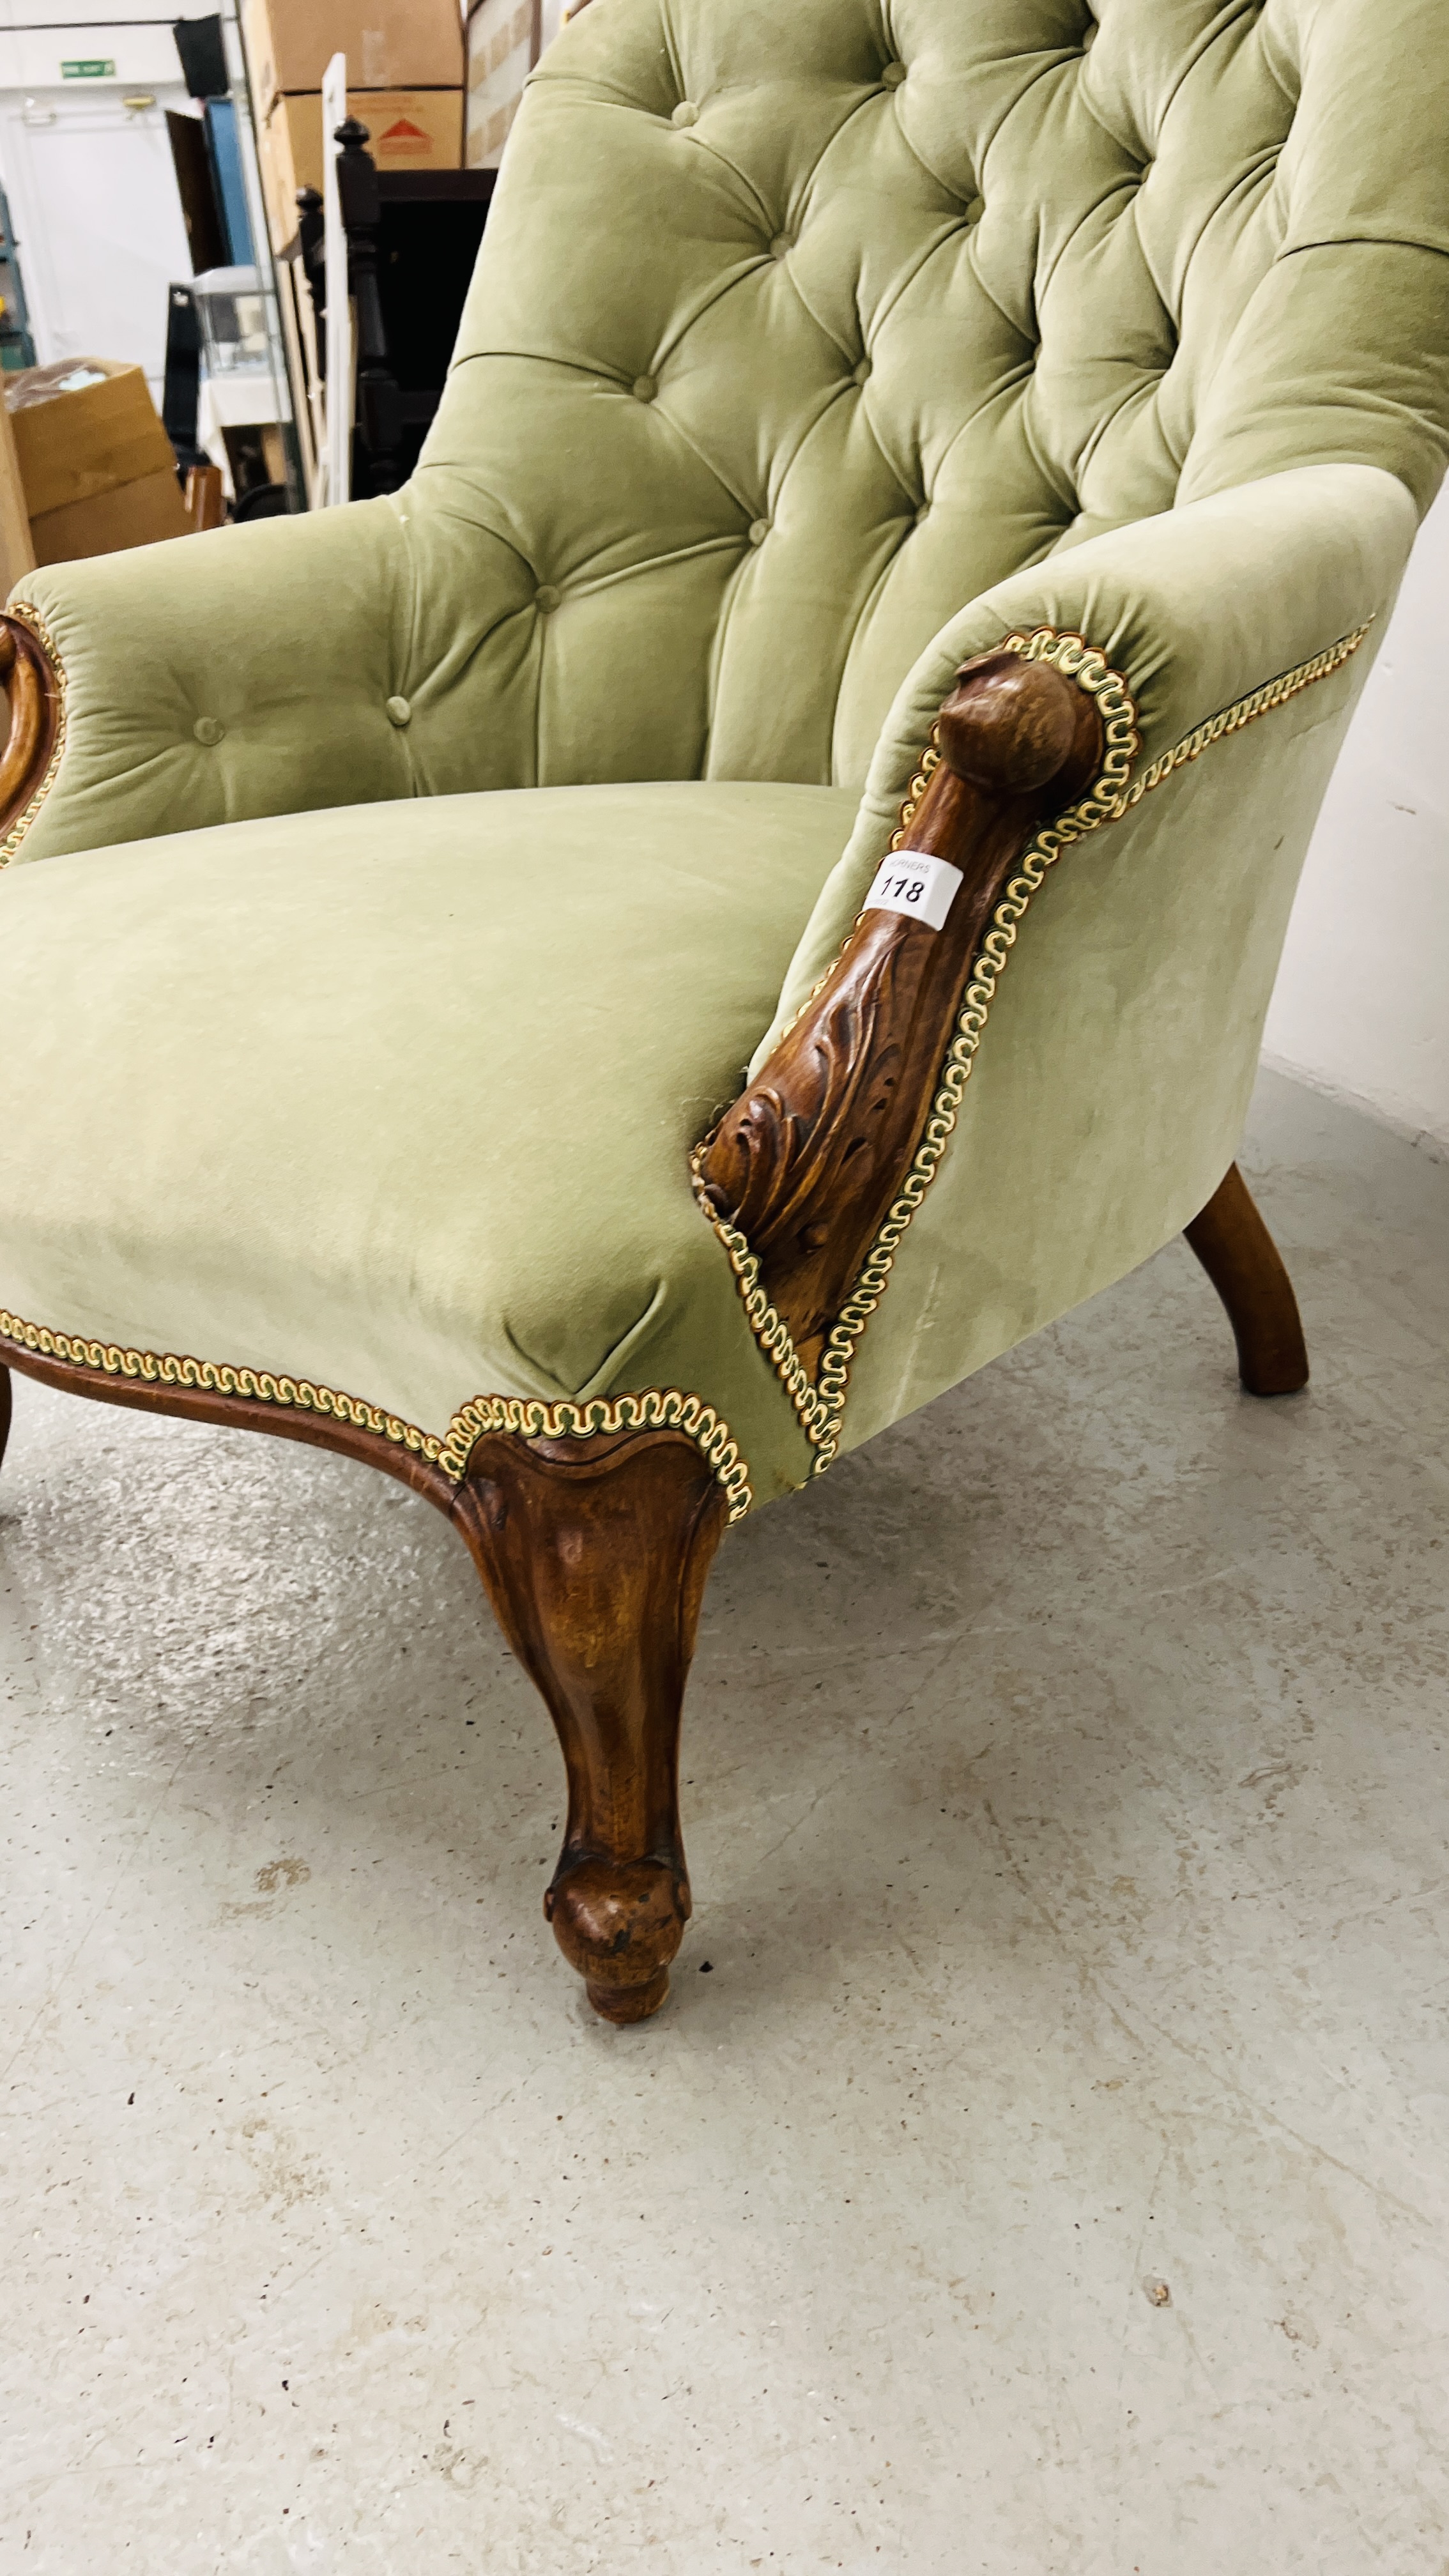 A VICTORIAN BUTTON BACK NURSING CHAIR - Image 11 of 11